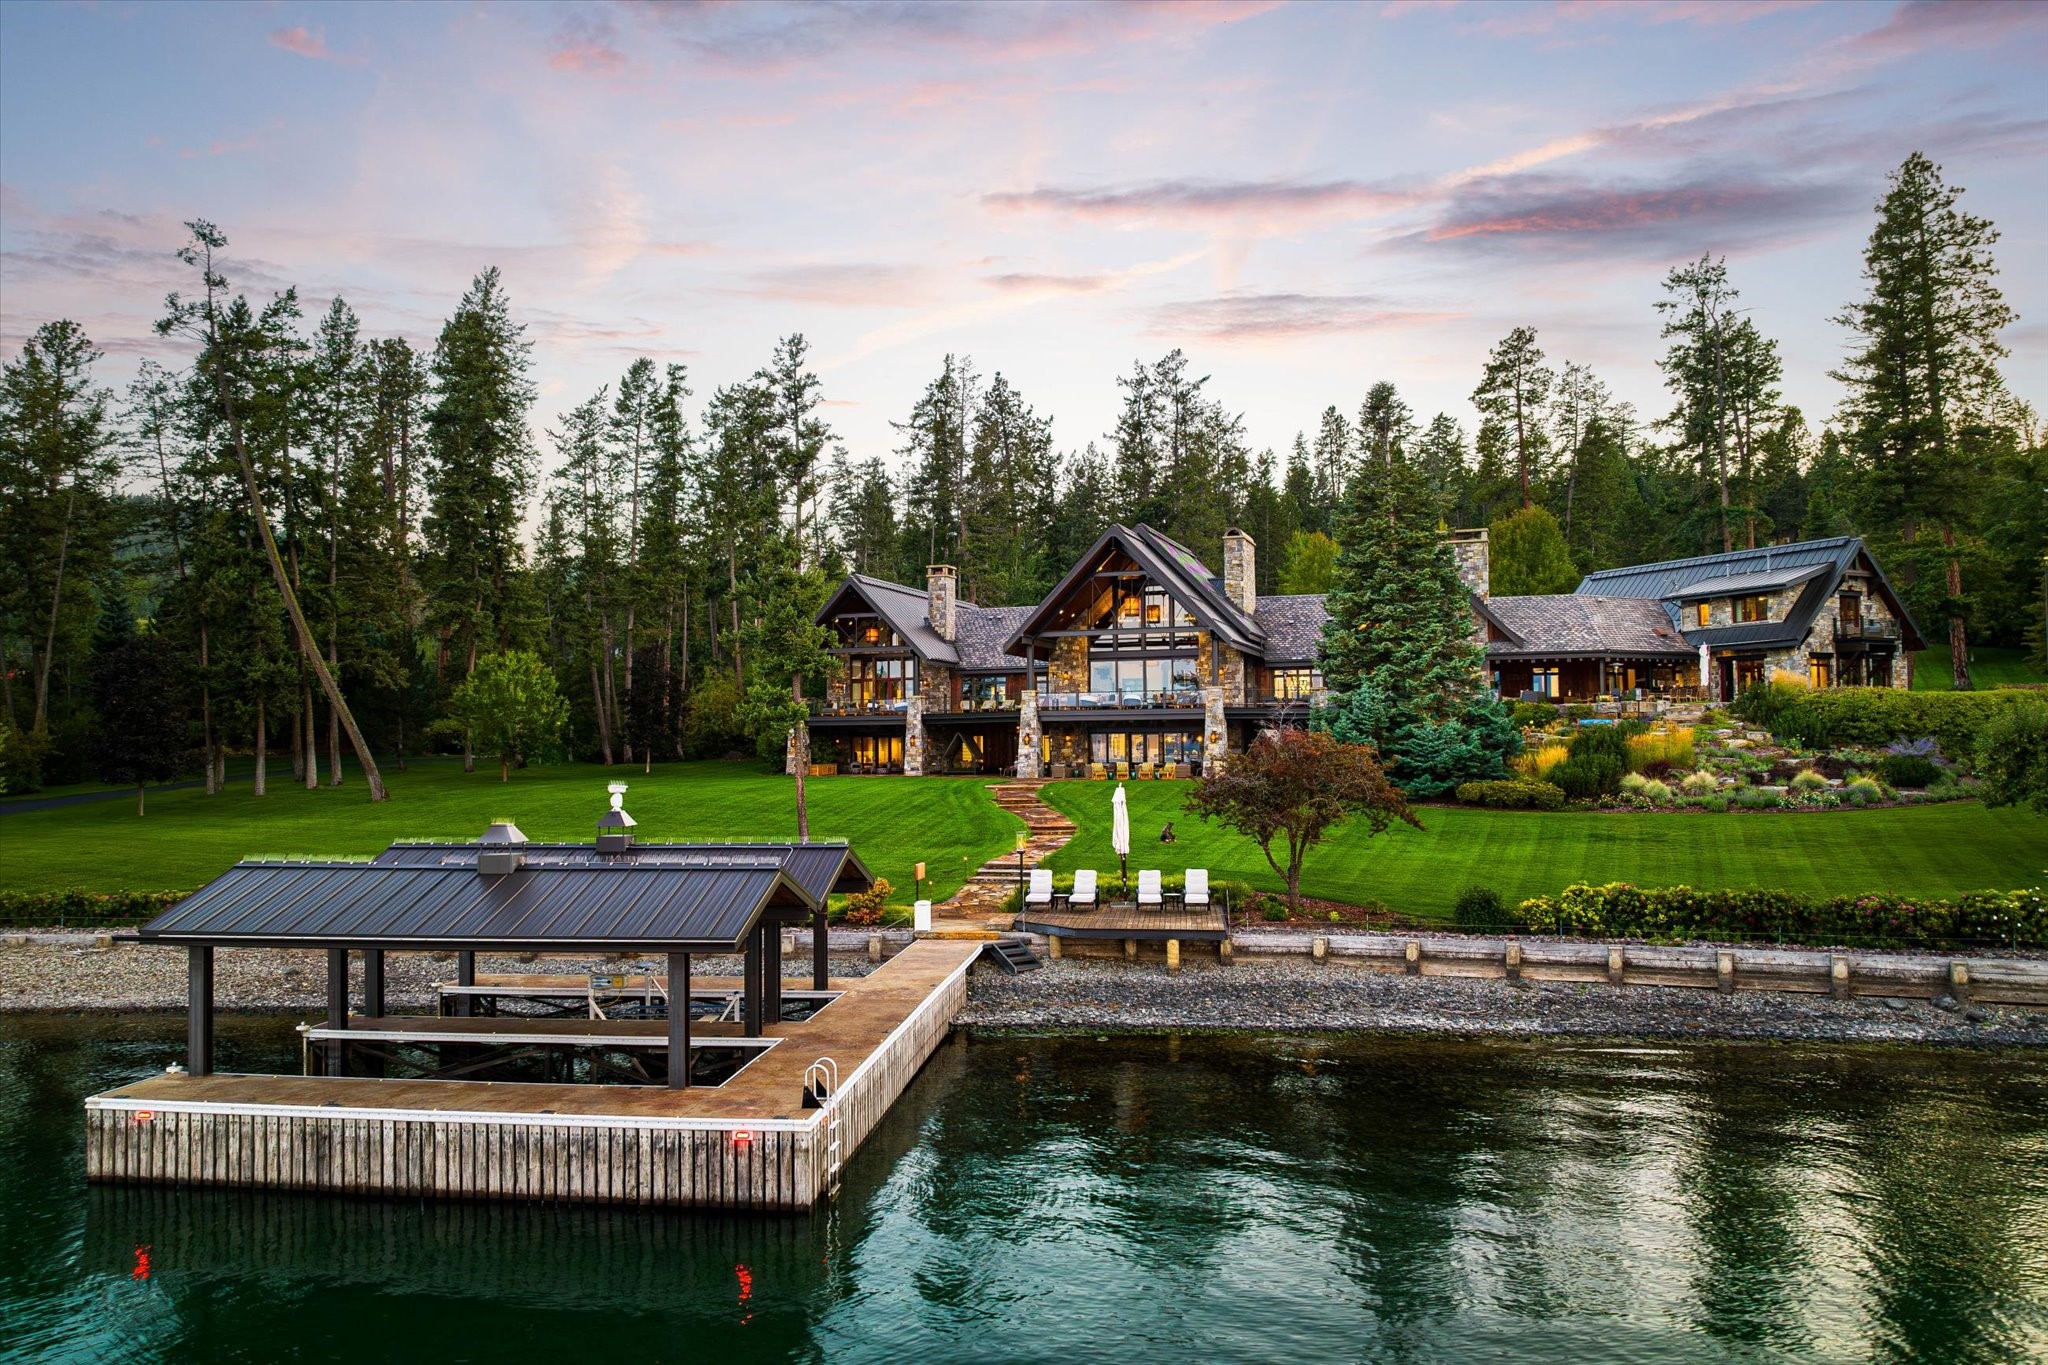 This Flathead Lake masterpiece was designed and constructed by Orlan Sorensen of Landmark Builders in 2009, with new interior design and refinishing in 2023. The 15,264 sf home includes 520 ft of lake frontage on 5.85 acres. The great room includes an 'avalanche' rock fireplace with oversized boulders tumbling from ceiling to floor, and a bank of sliding glass panels that retract completely into stone walls. The downstairs entertaining space features a full bar, pool table, and updated theater.  There are 6 total bedrooms, including a 2-bedroom guest apartment above the garage with a separate kitchenette and living space. The home also features a total of five fireplaces, each with its own unique stone and steel design.